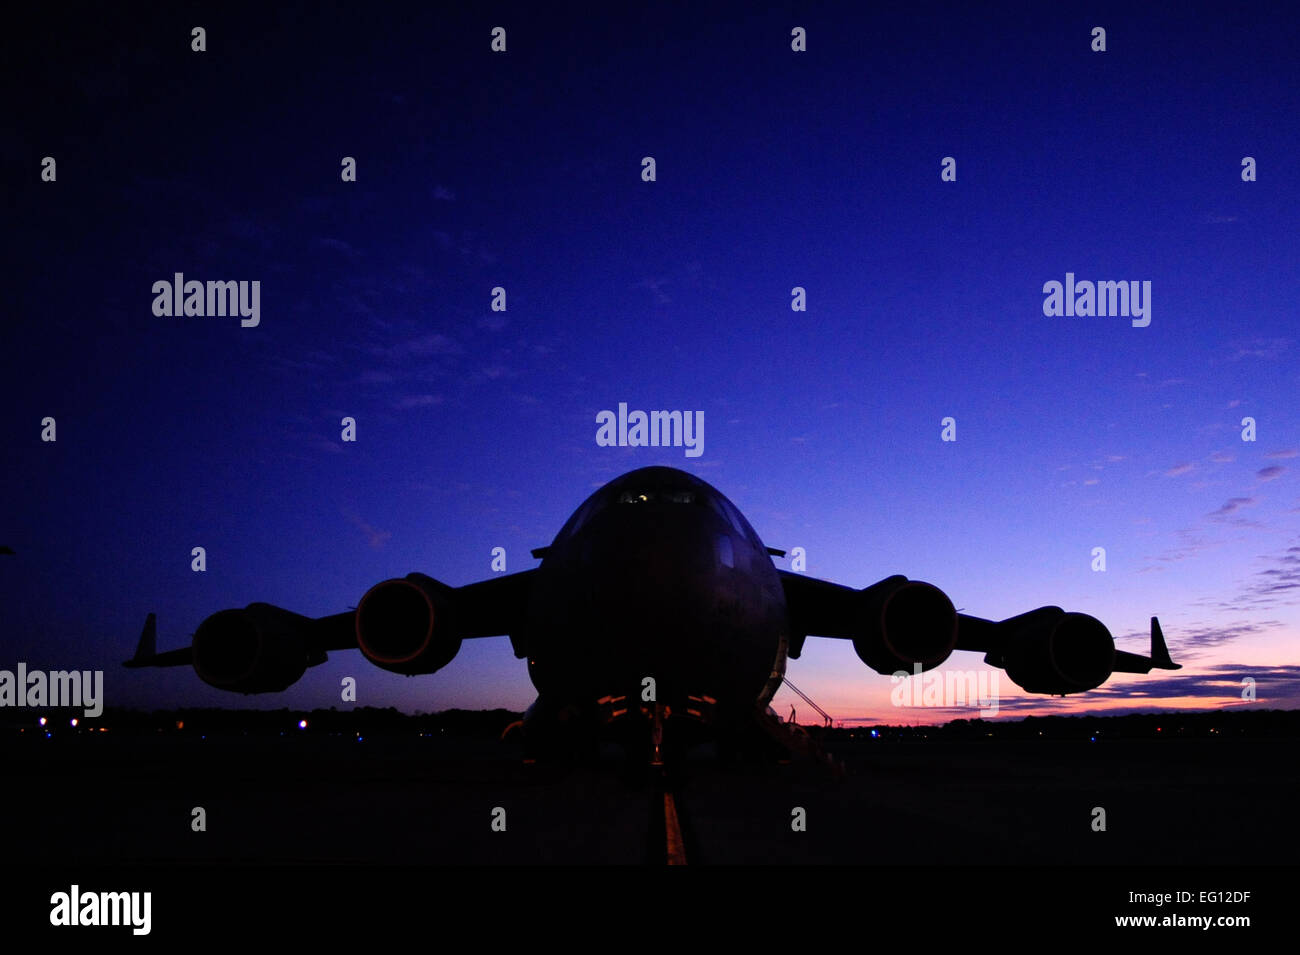 Early morning pre-flight checks on a U.S. C-17 Globemaster III from Charleston AFB, S.C., before a strategic brigade airdrop exercise over North Auxiliary Airfield near Northern, S.C., Dec. 16, 2009, demonstrating the global projection of U.S. airpower. Airborne Soldiers from the 2-319th Airborne Field Artillery, 82nd Airborne Division, Ft. Bragg, N.C., were airdropped in the exercise along with cargo pallets to simulate the seizure of a remote airfield, providing a joint training opportunity for the Airmen and Soldiers. The training mission included airdrops over North Auxiliary Airfield, aer Stock Photo